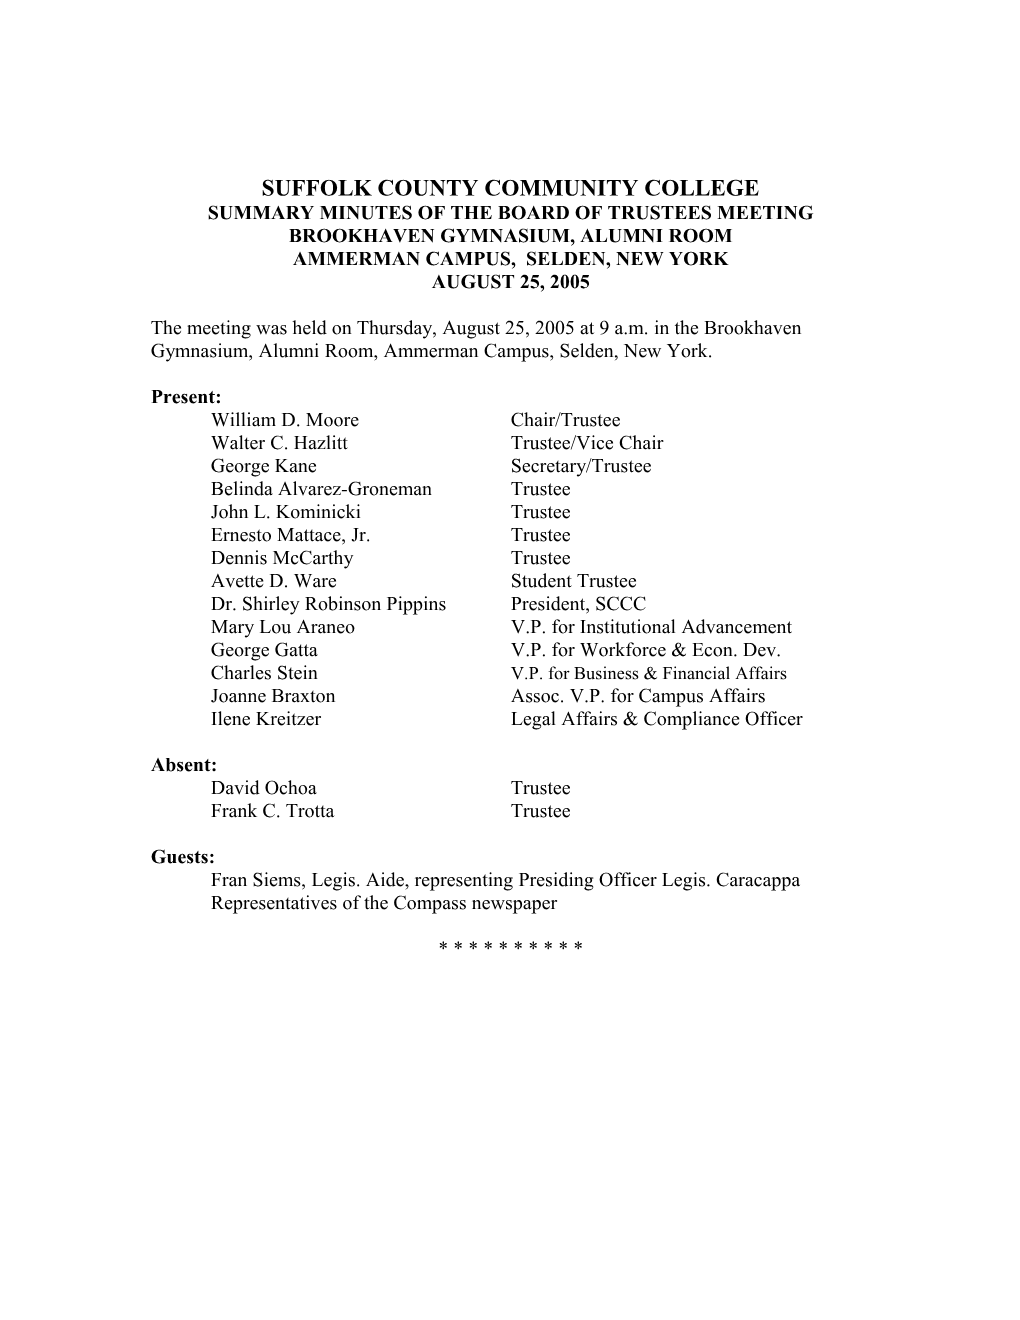 Suffolk County Community College s38